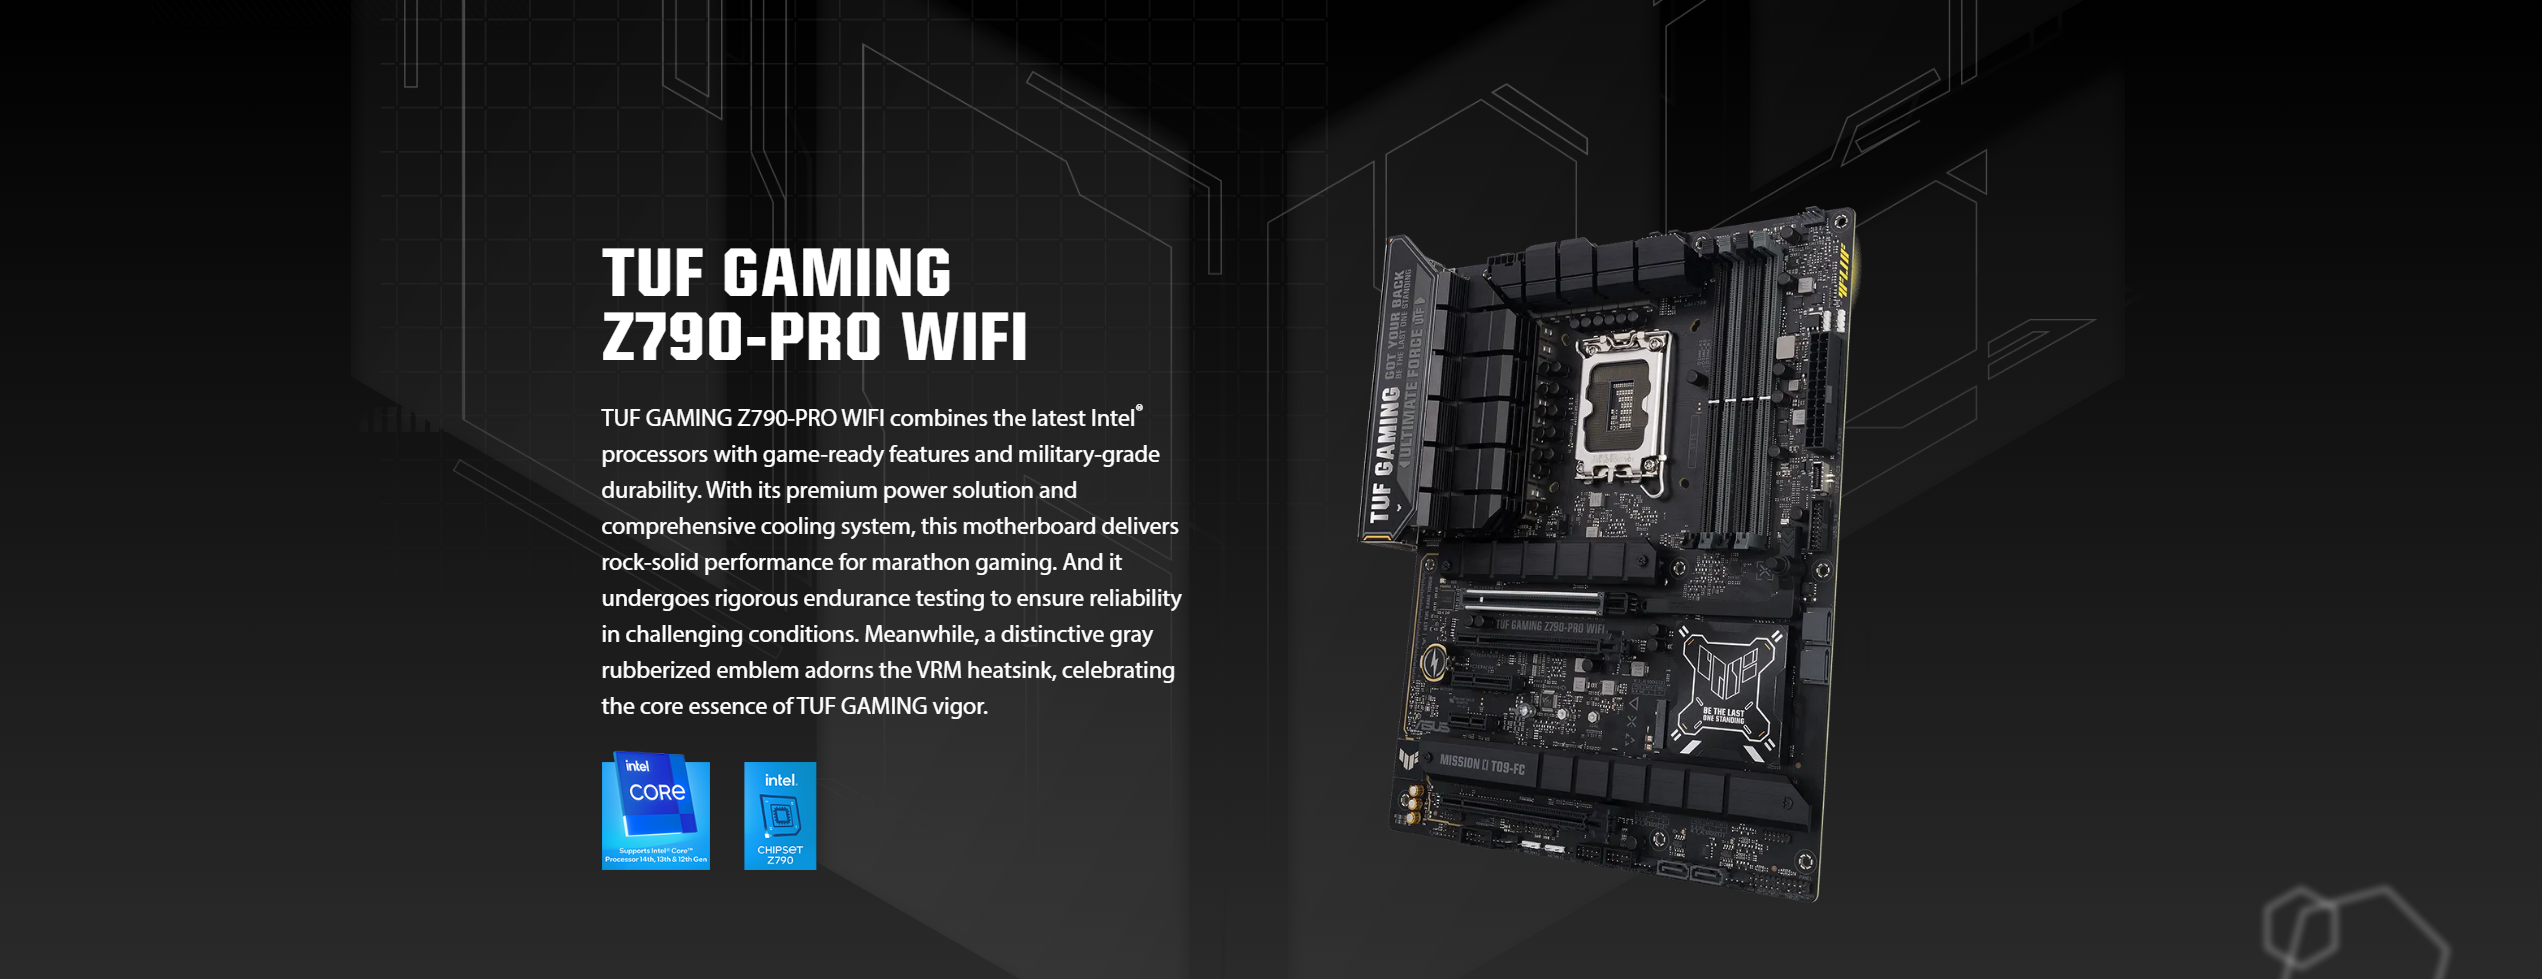 A large marketing image providing additional information about the product ASUS TUF Gaming Z790-Pro Wifi DDR5 LGA1700 ATX Desktop Motherboard - Additional alt info not provided